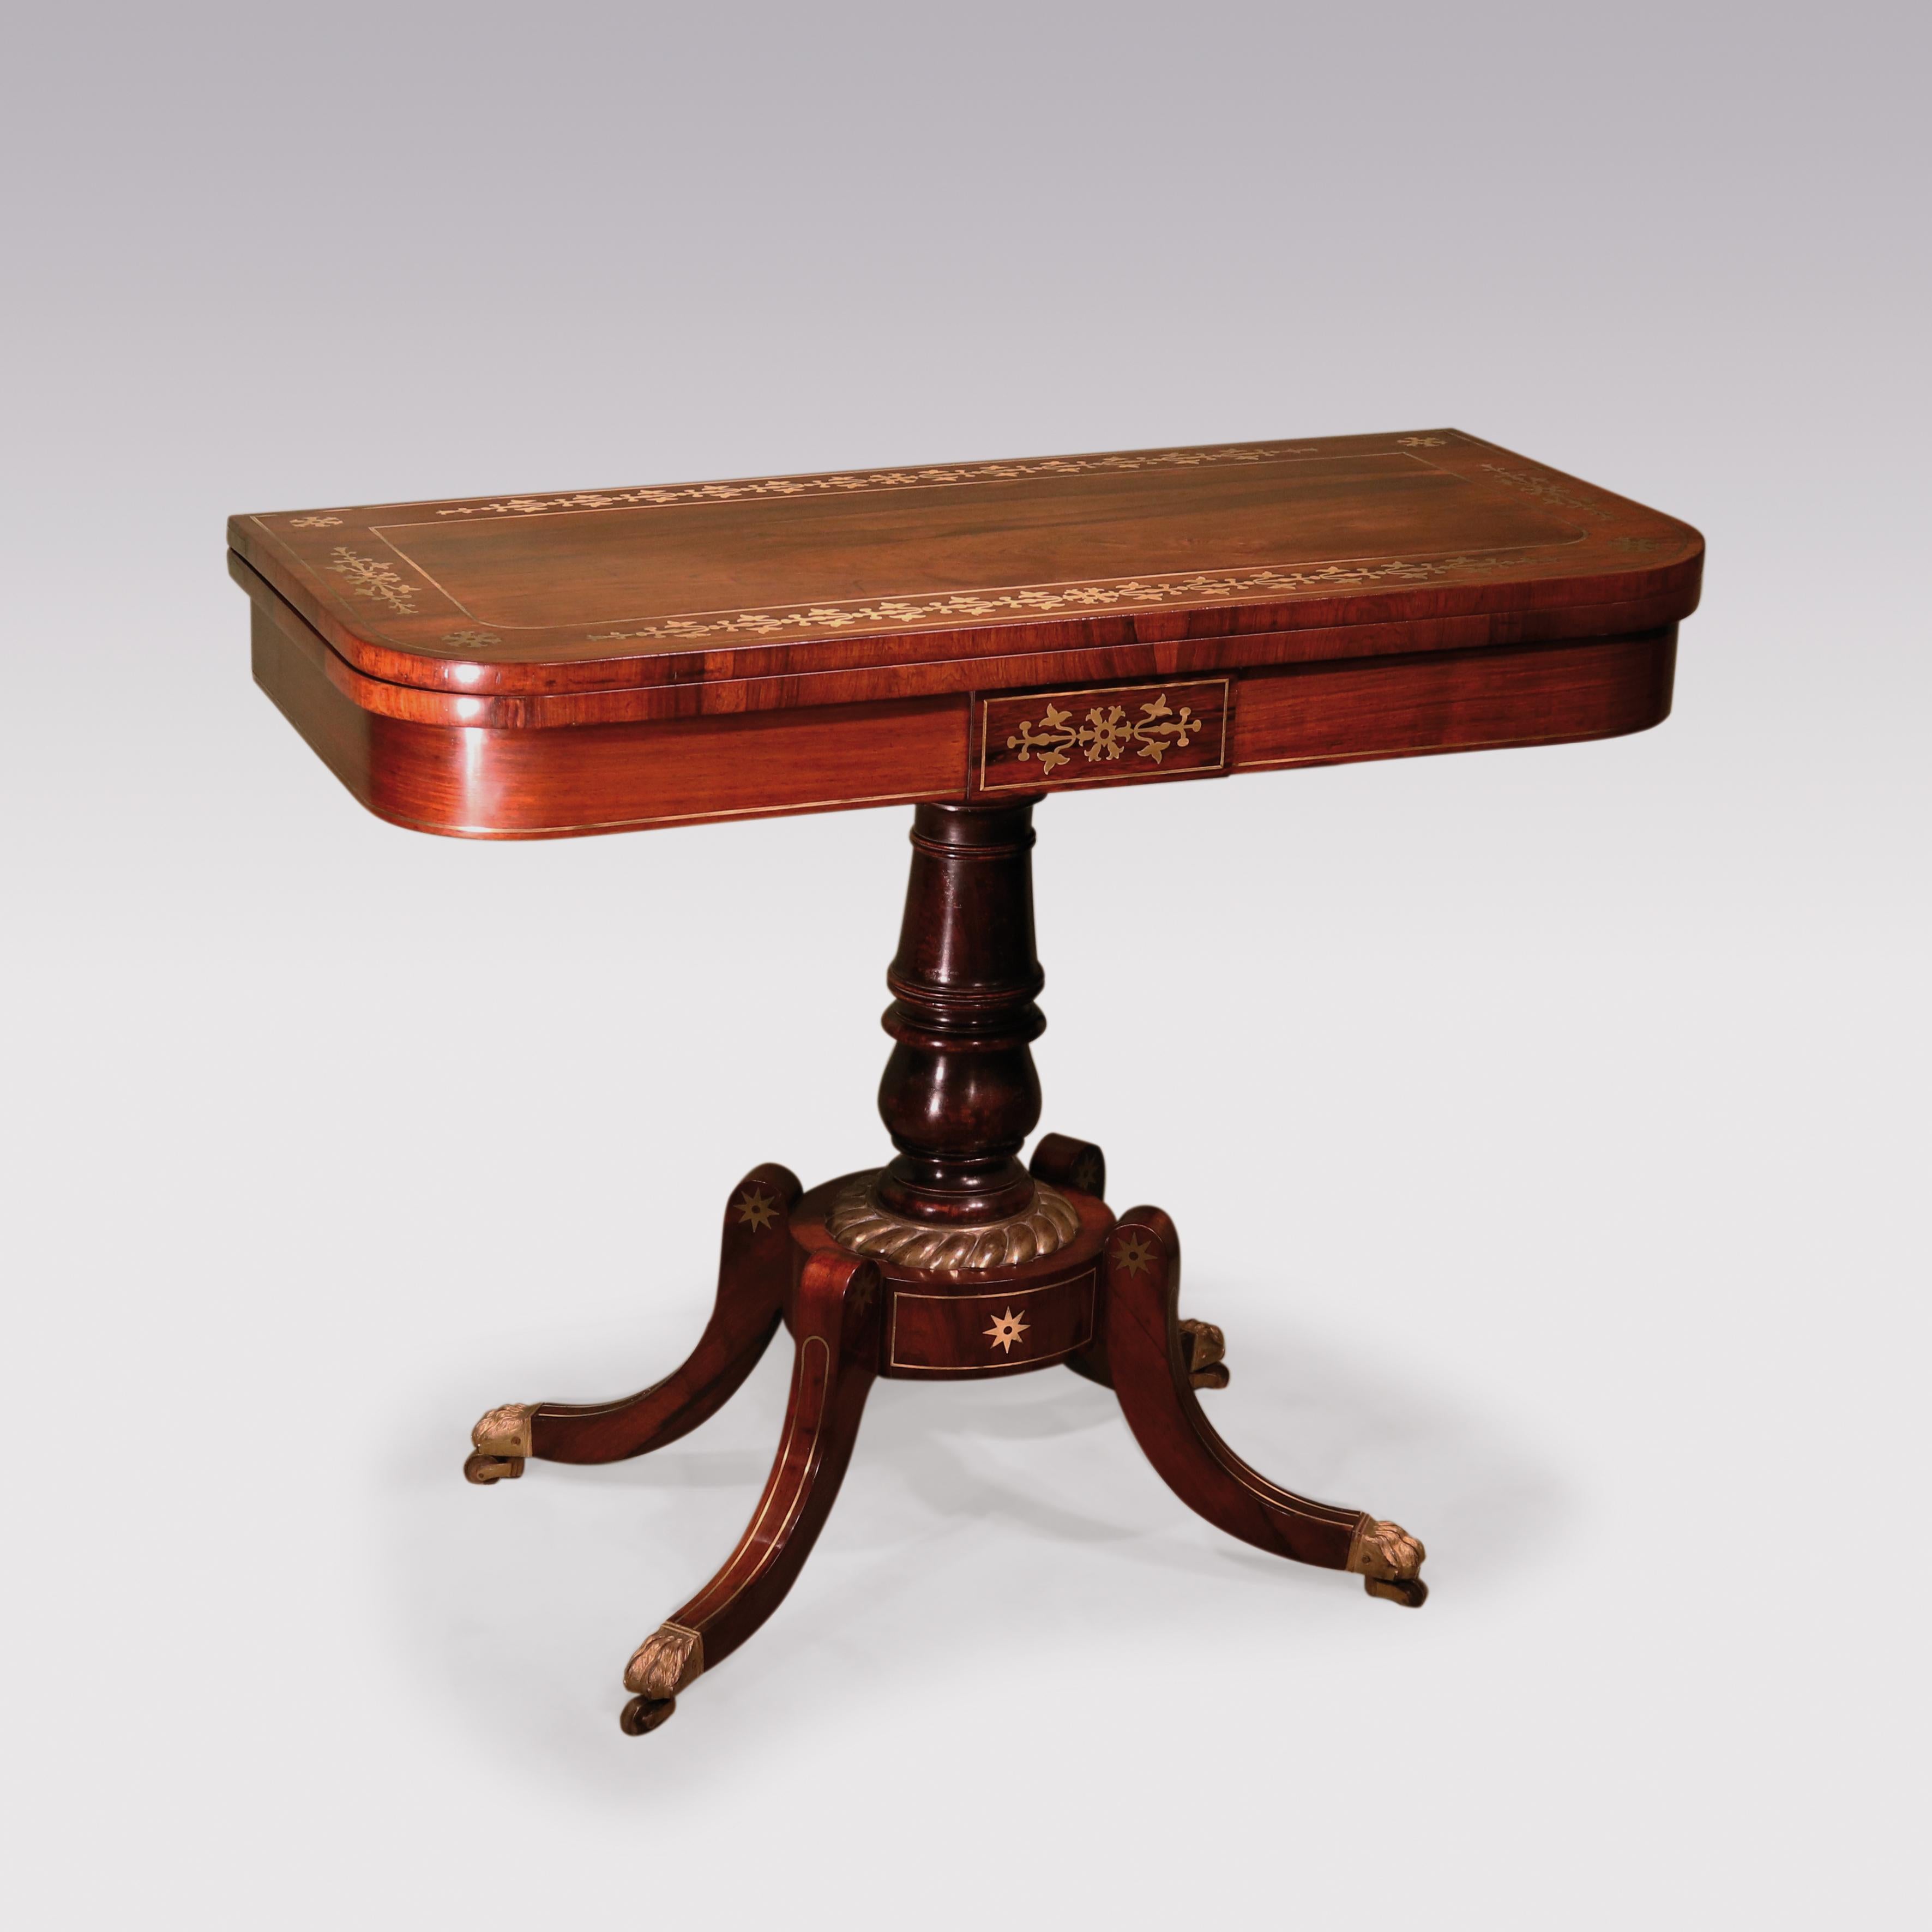 A fine pair of 19th century Regency period figured rosewood card tables. The rounded rectangular tops are cross banded and inlaid with decorative brass motifs. Raised above a panelled frieze and simulated baluster turned stem and ending in four